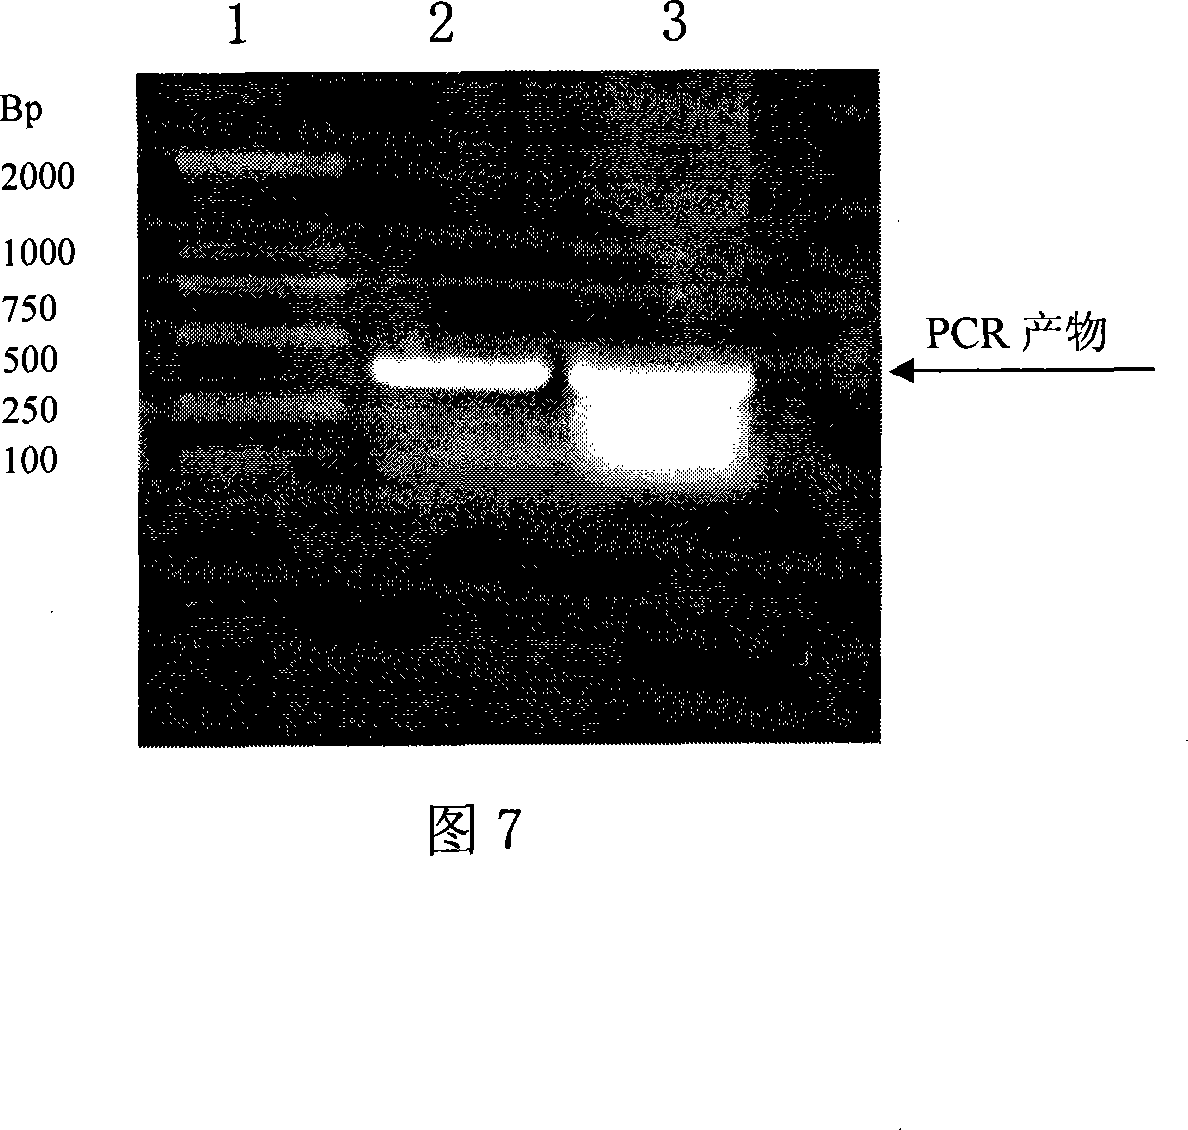 Monoclonal antibody for resisting bovine prion protein and application thereof